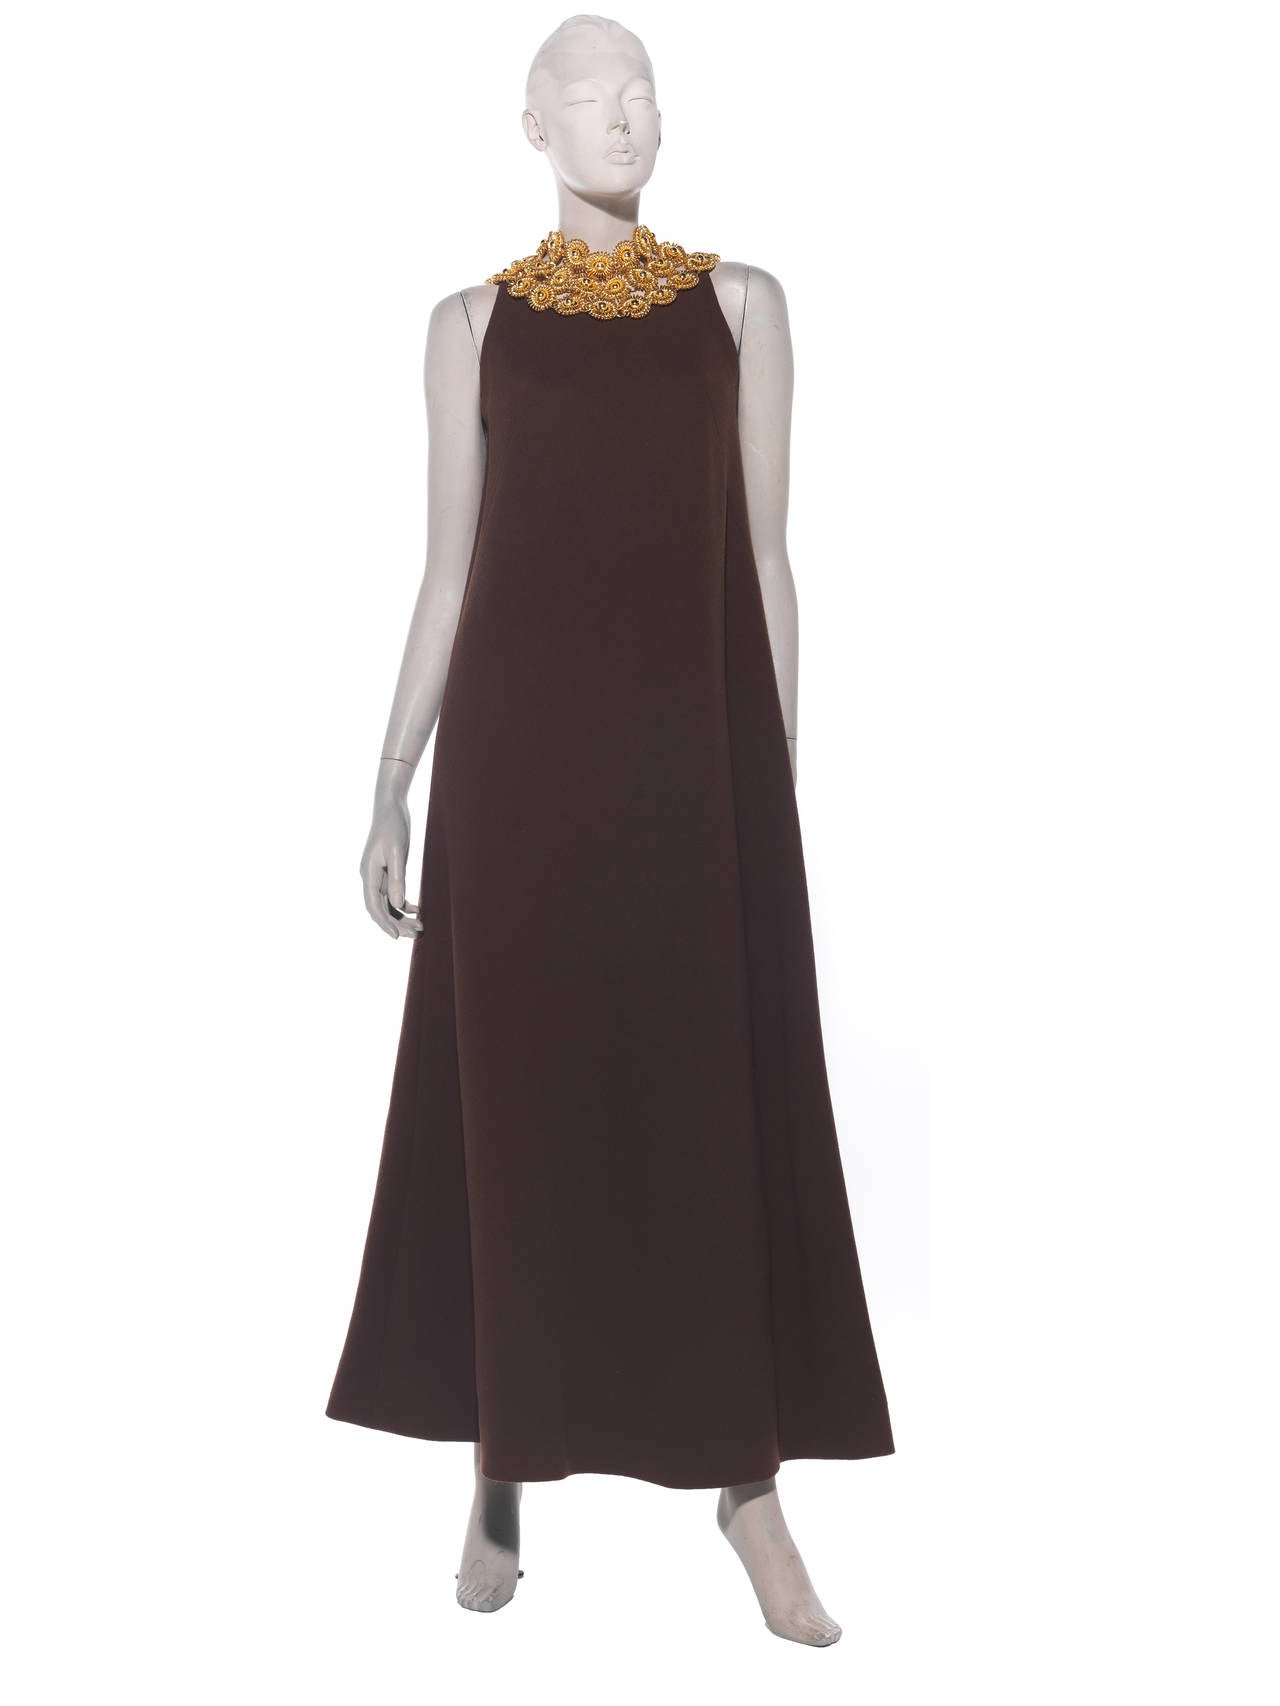 Jacques Heim, circa 1960's A-line, sleeveless, chocolate brown heavy gauge wool-crepe gown, with zip back and fully lined in silk with attached gold-tone neckpiece. 